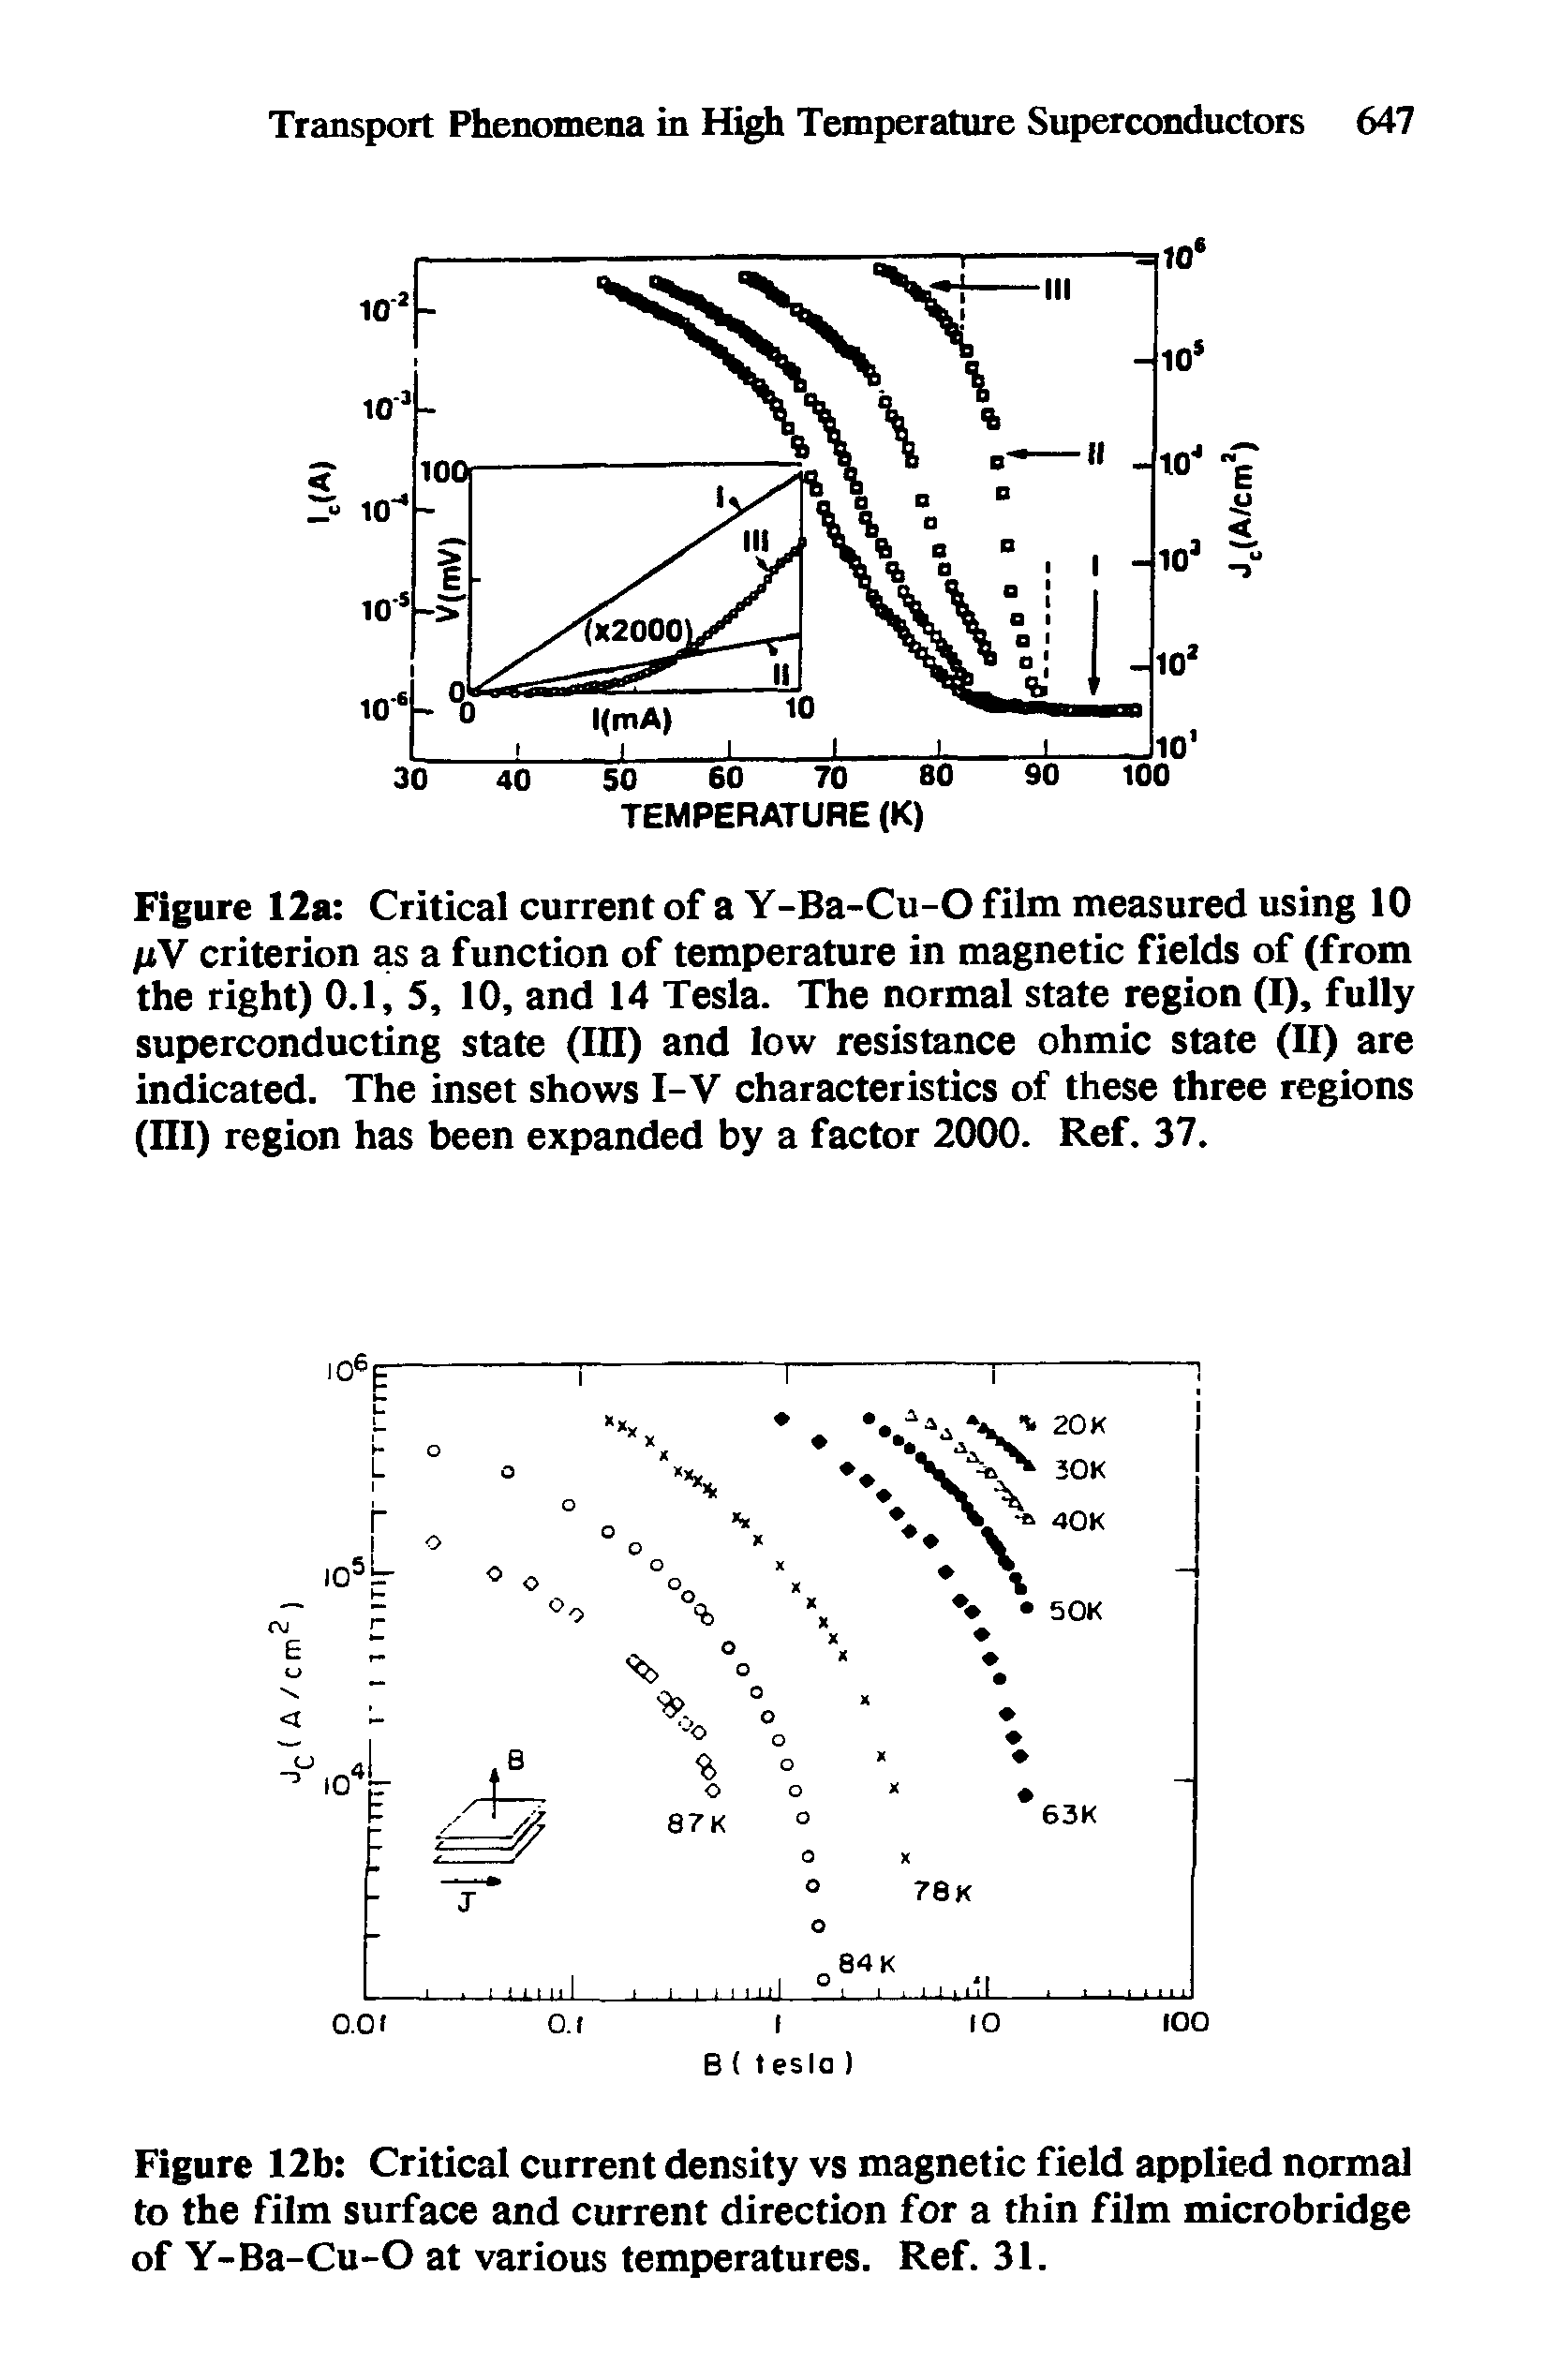 Figure 12a Critical current of a Y-Ba-Cu-O film measured using 10 /xV criterion as a function of temperature in magnetic fields of (from the right) 0.1, 5, 10, and 14 Tesla. The normal state region (I), fully superconducting state (III) and low resistance ohmic state (II) are indicated. The inset shows I-V characteristics of these three regions (III) region has been expanded by a factor 2000. Ref. 37.